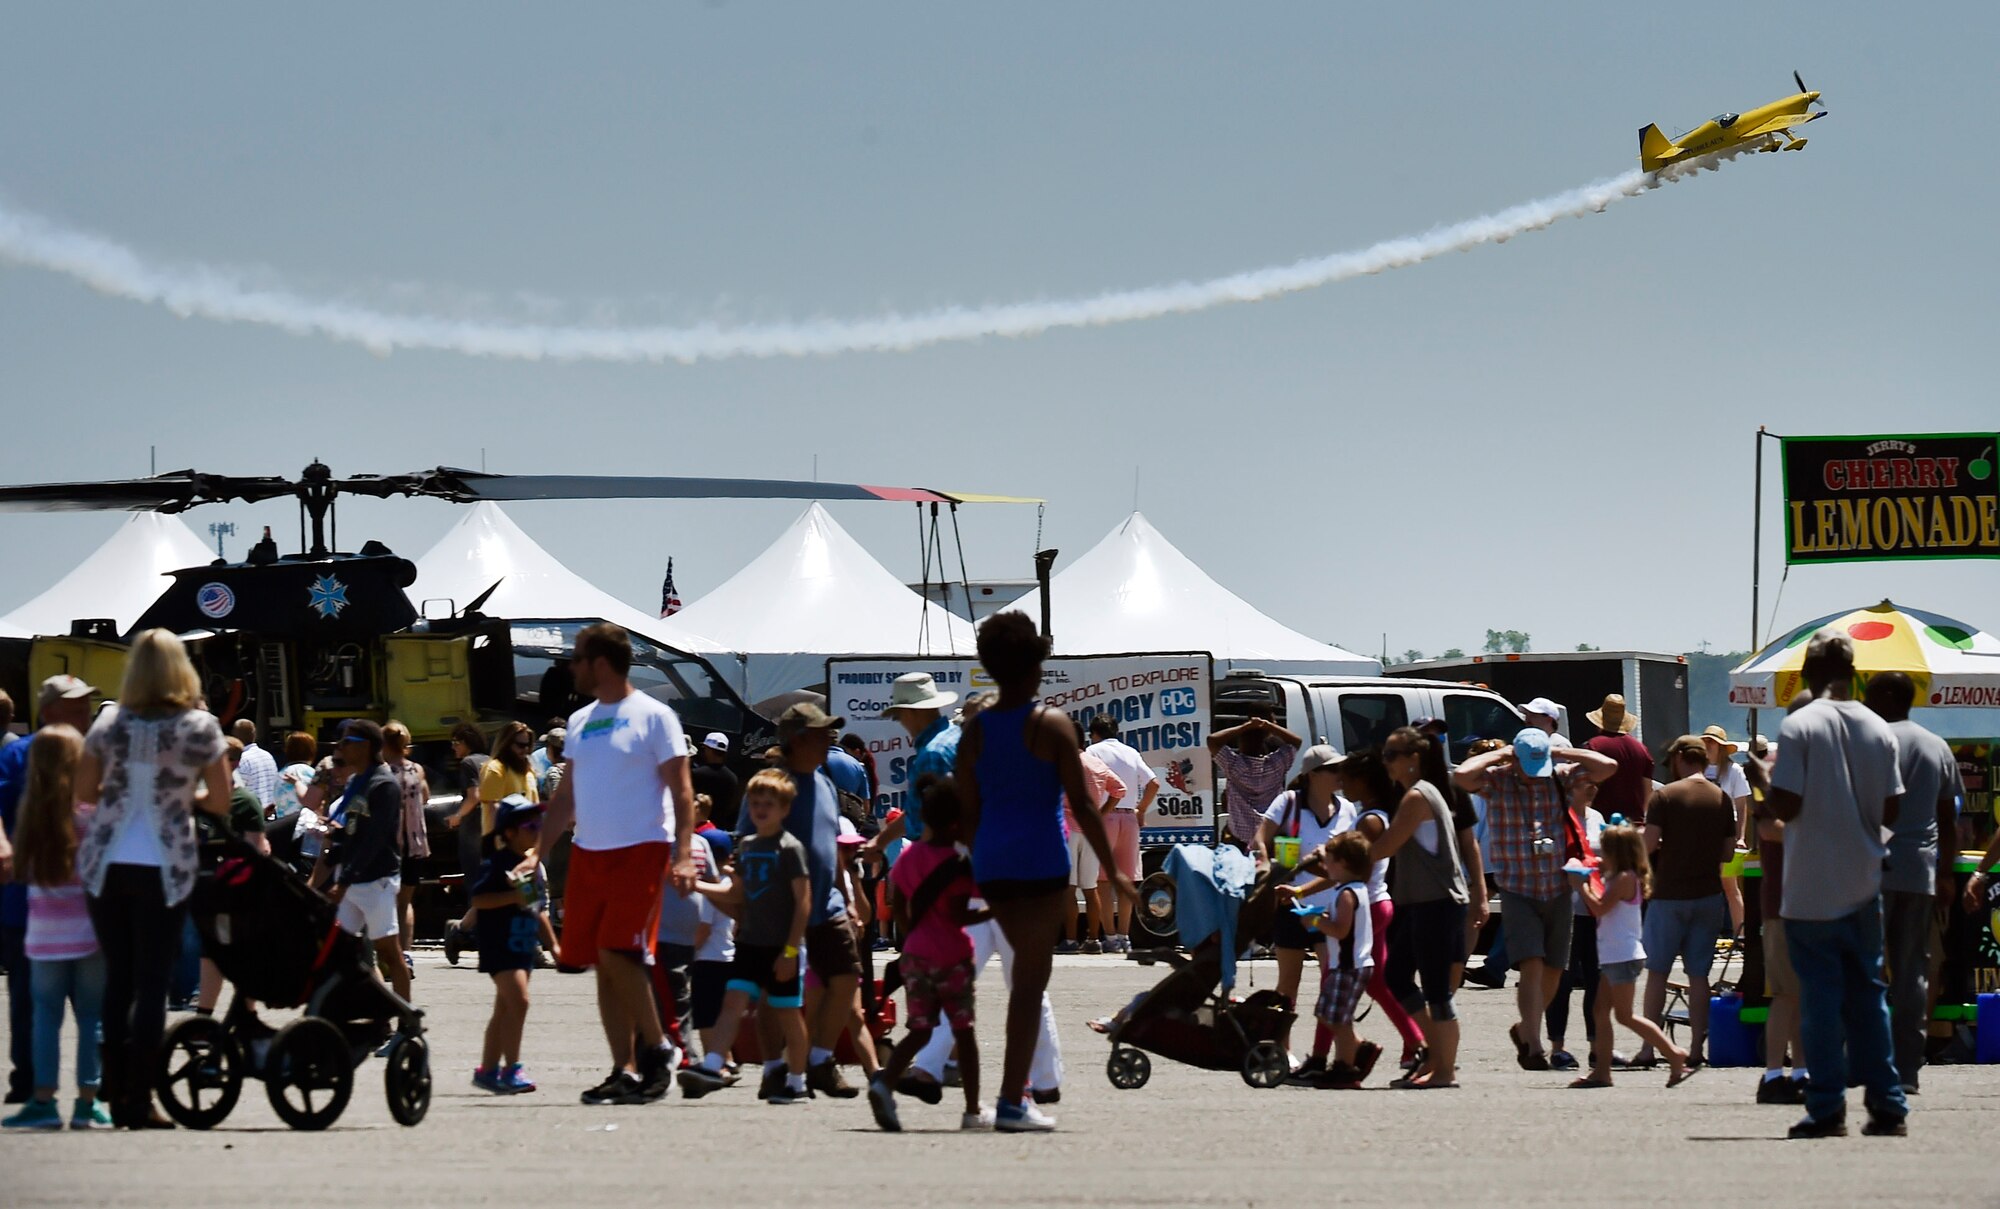 The Greg Koontz Alabama Boys perform during the 2018 Air and Space Expo April 28, 2018, at Joint Base Charleston, S.C.